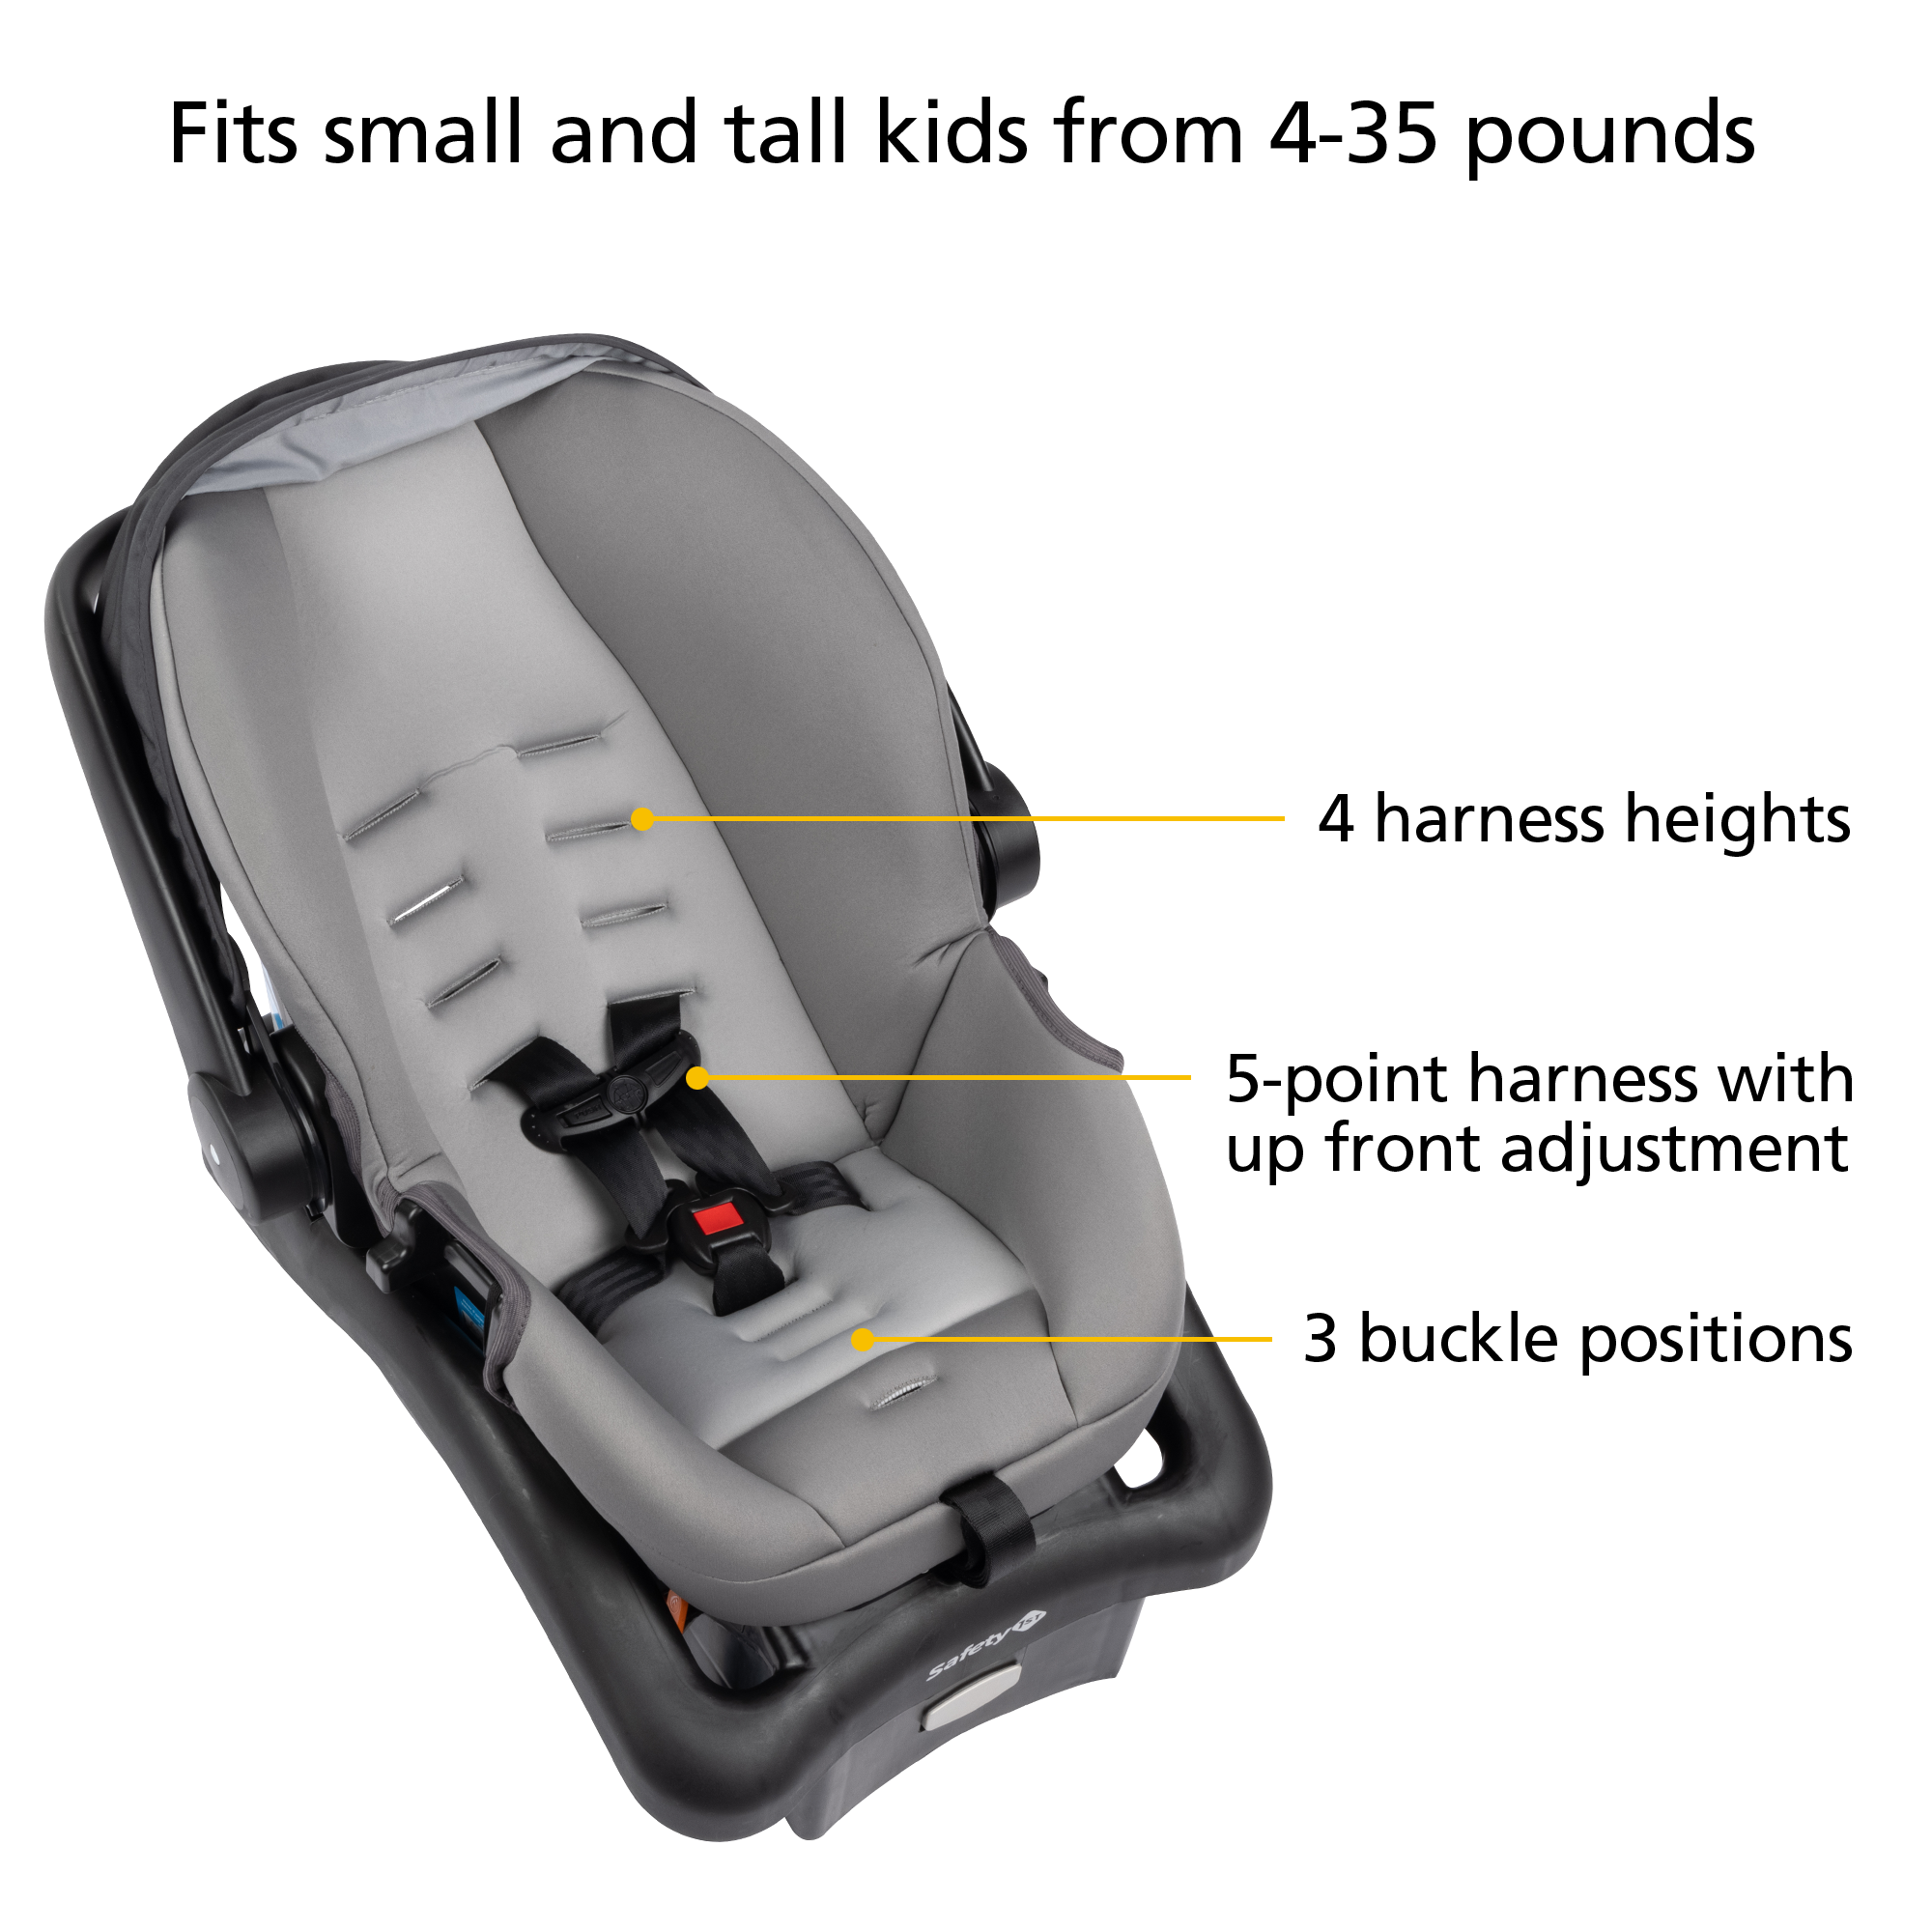 onBoard™35 SecureTech™ Infant Car Seat - red to green visual indicators when LATCH is properly tightened - self-retracting one-click LATCH connectors